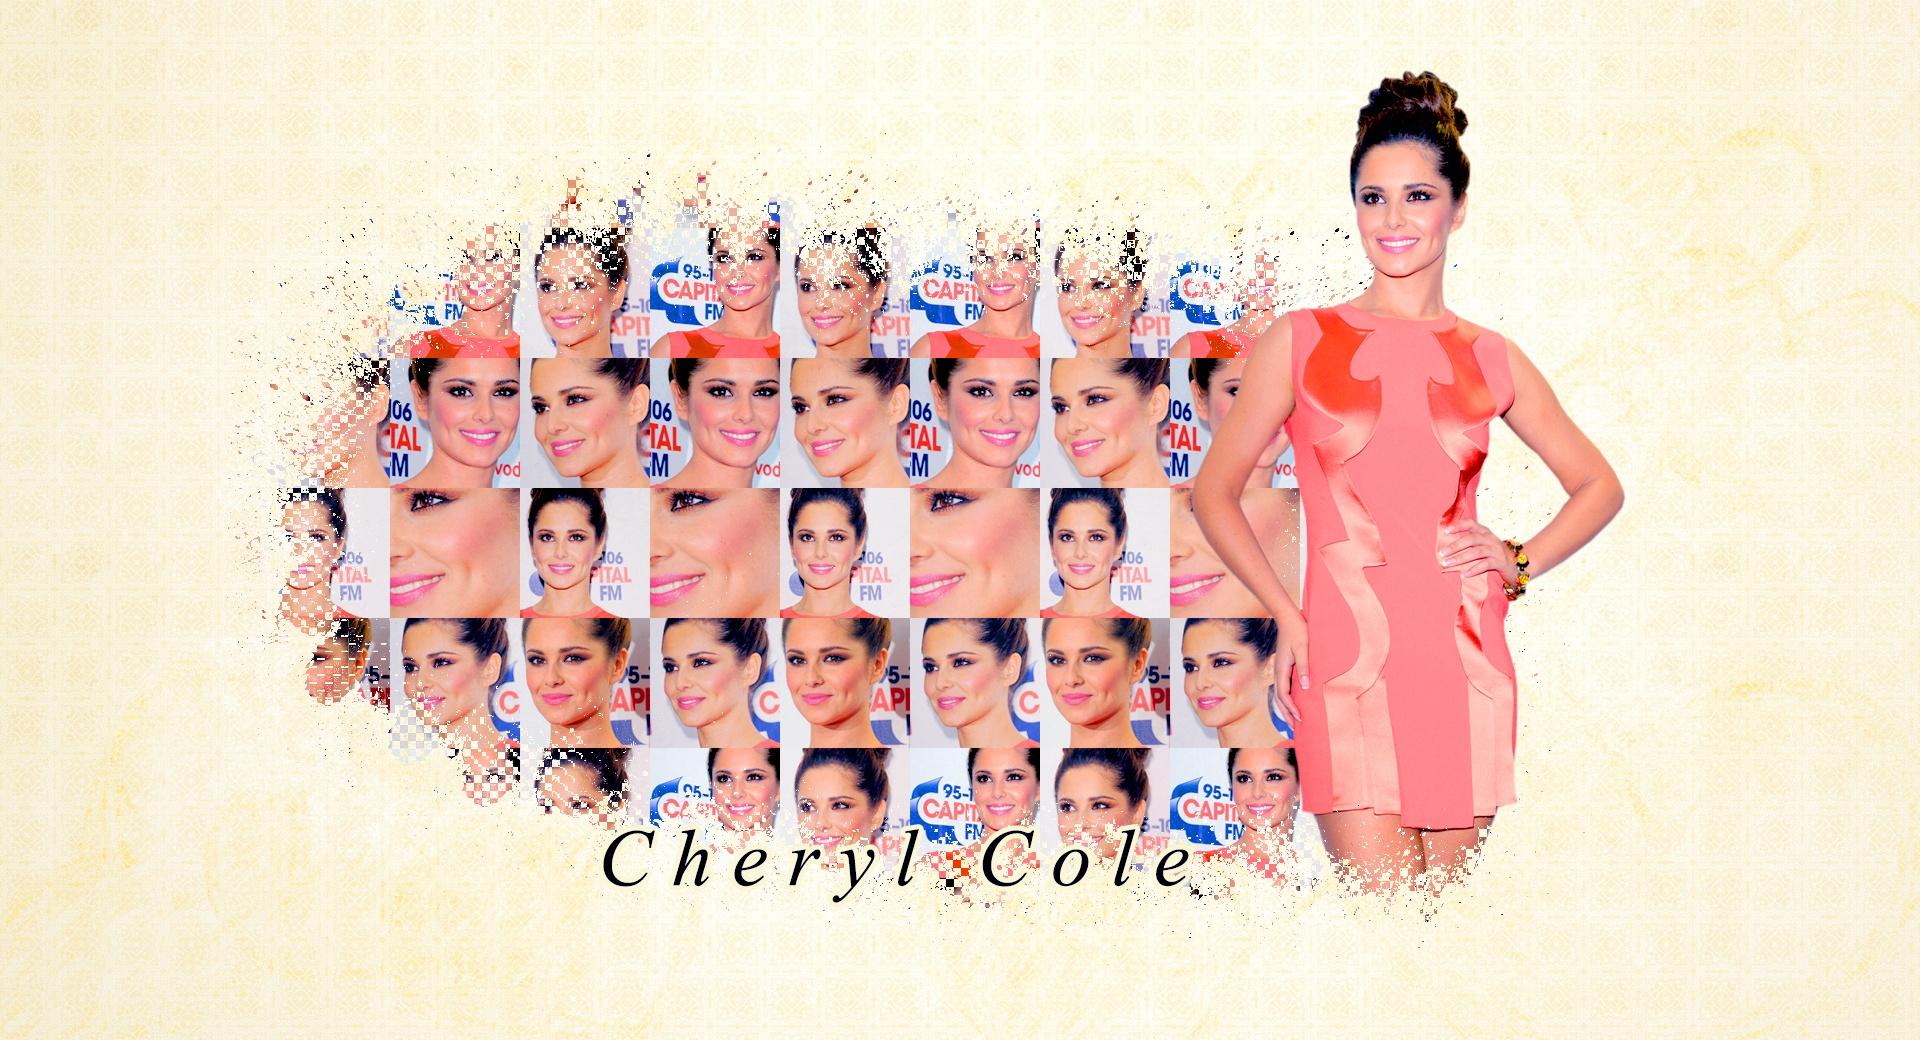 Cheryl Cole at Capital FM Summertime Ball 2012 wallpapers HD quality